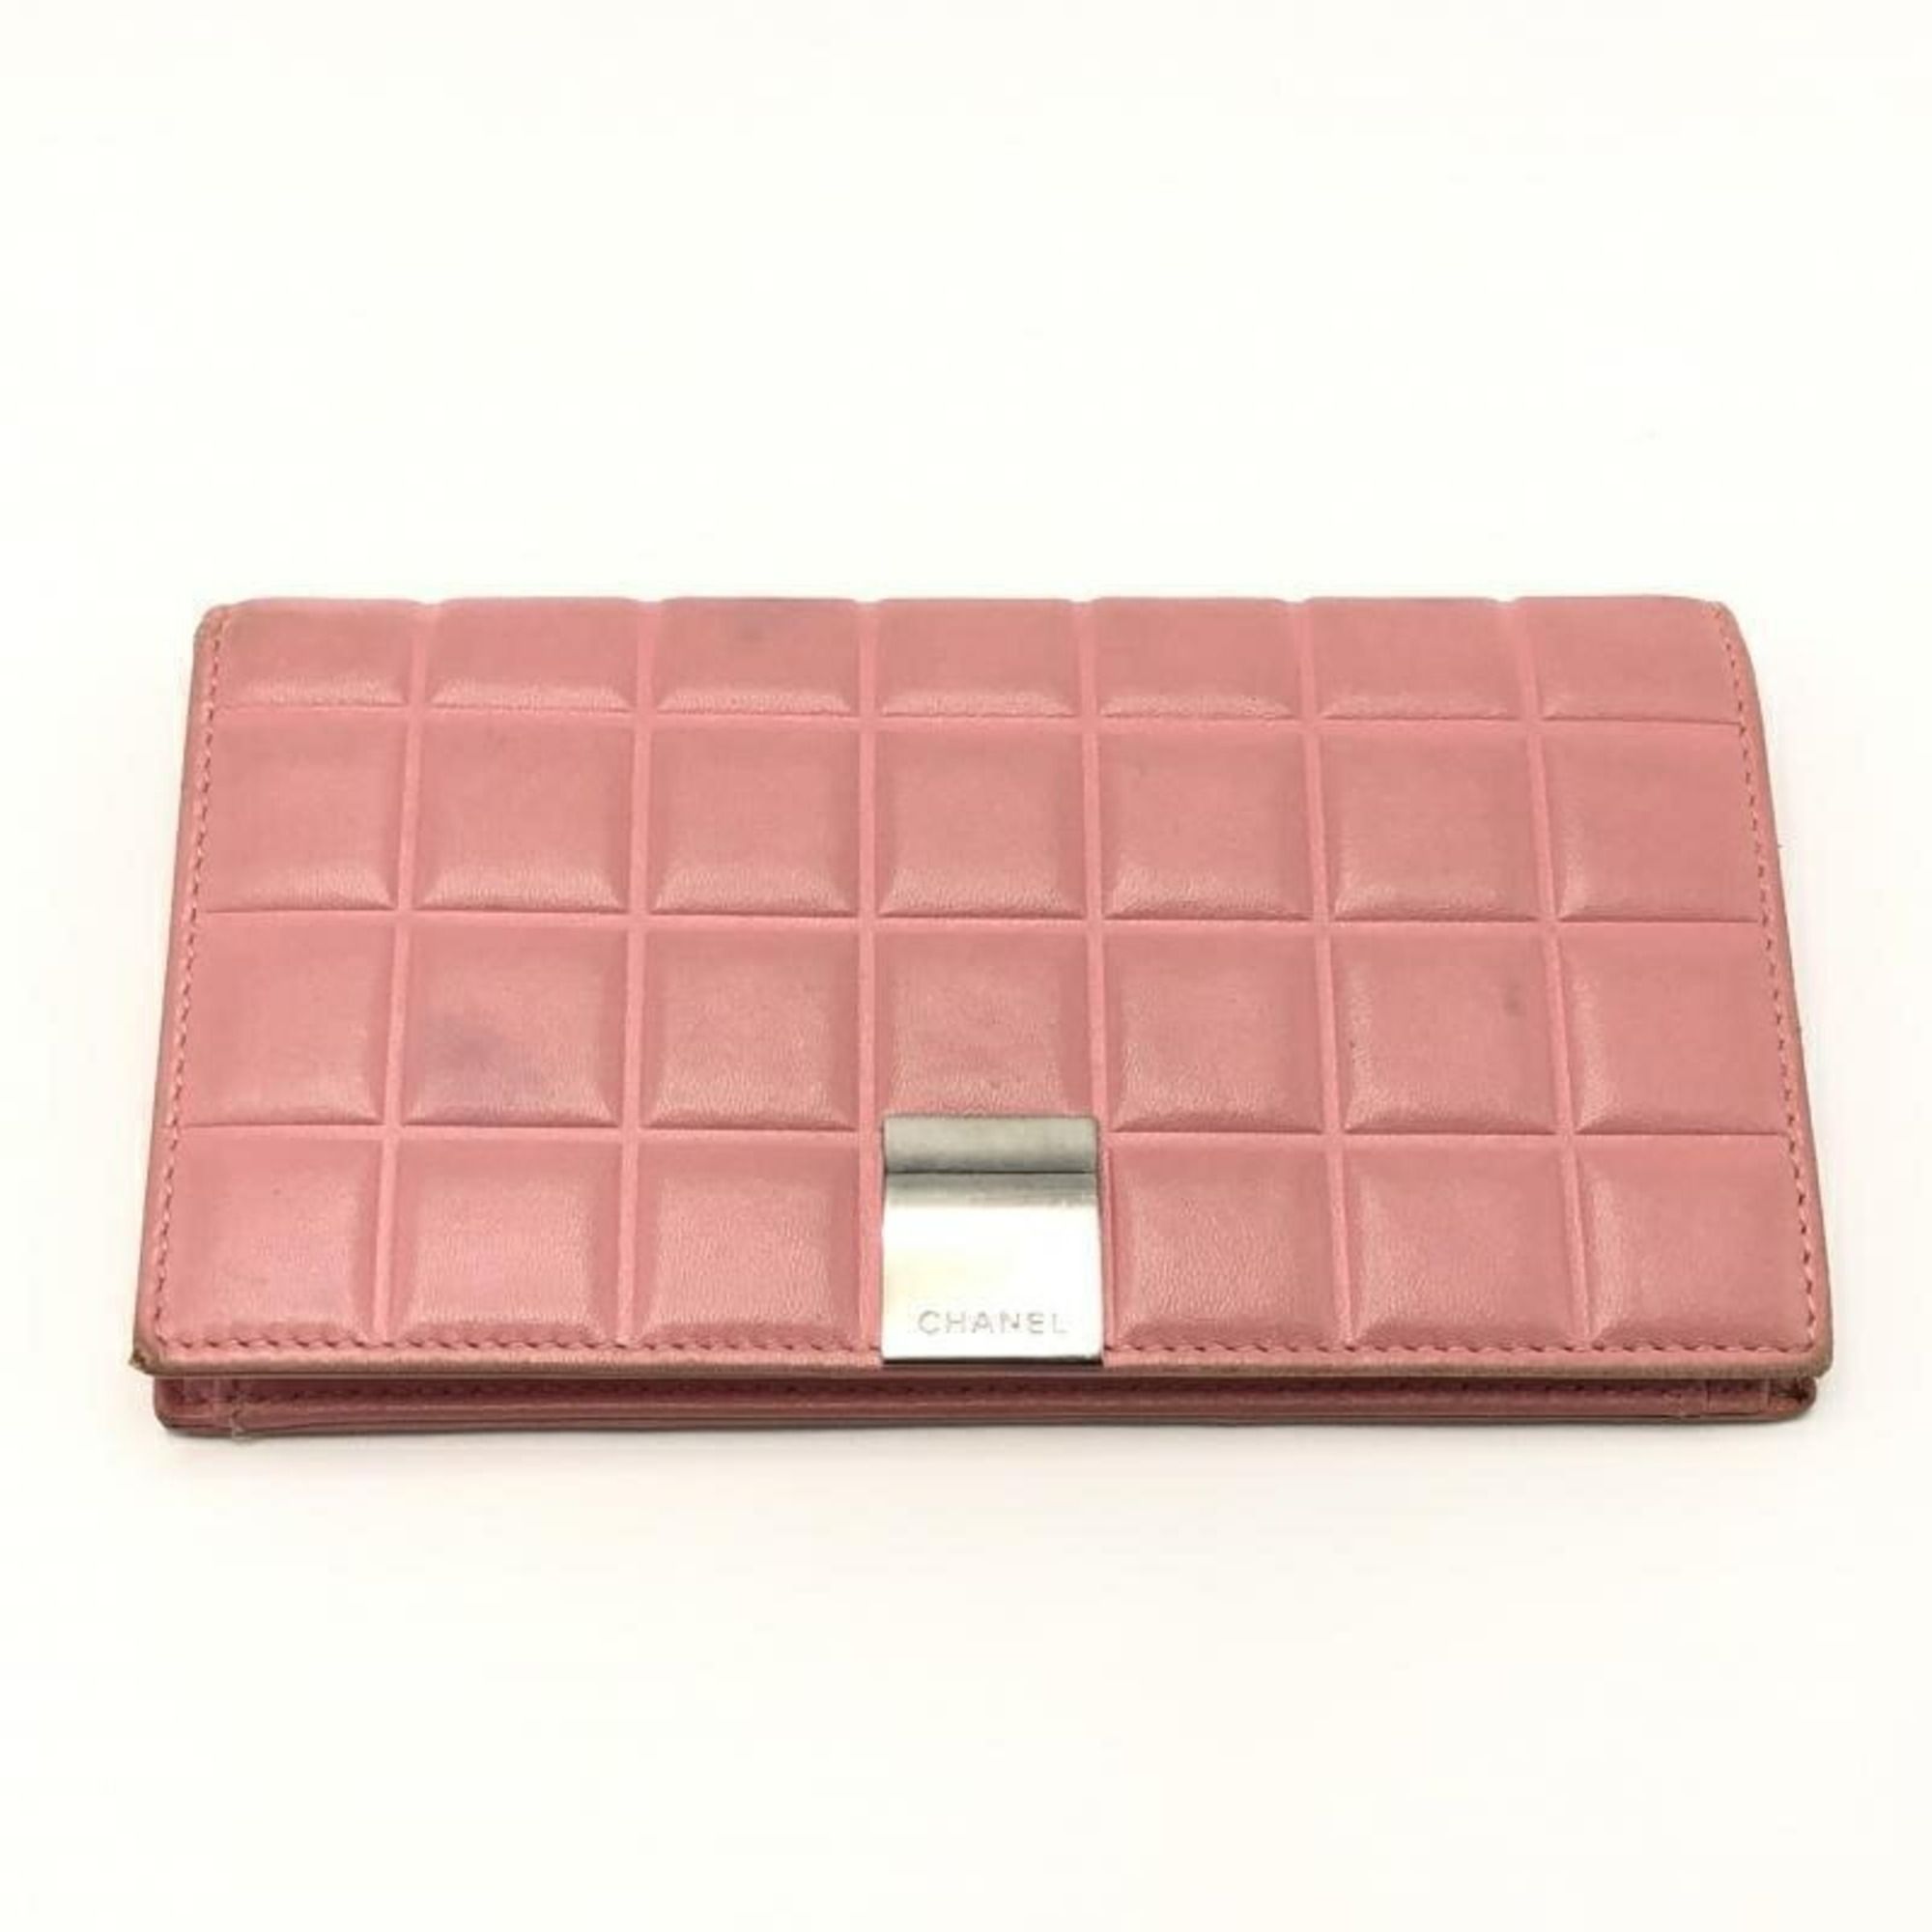 Chanel CHANEL chocolate bar long wallet pink Chanel